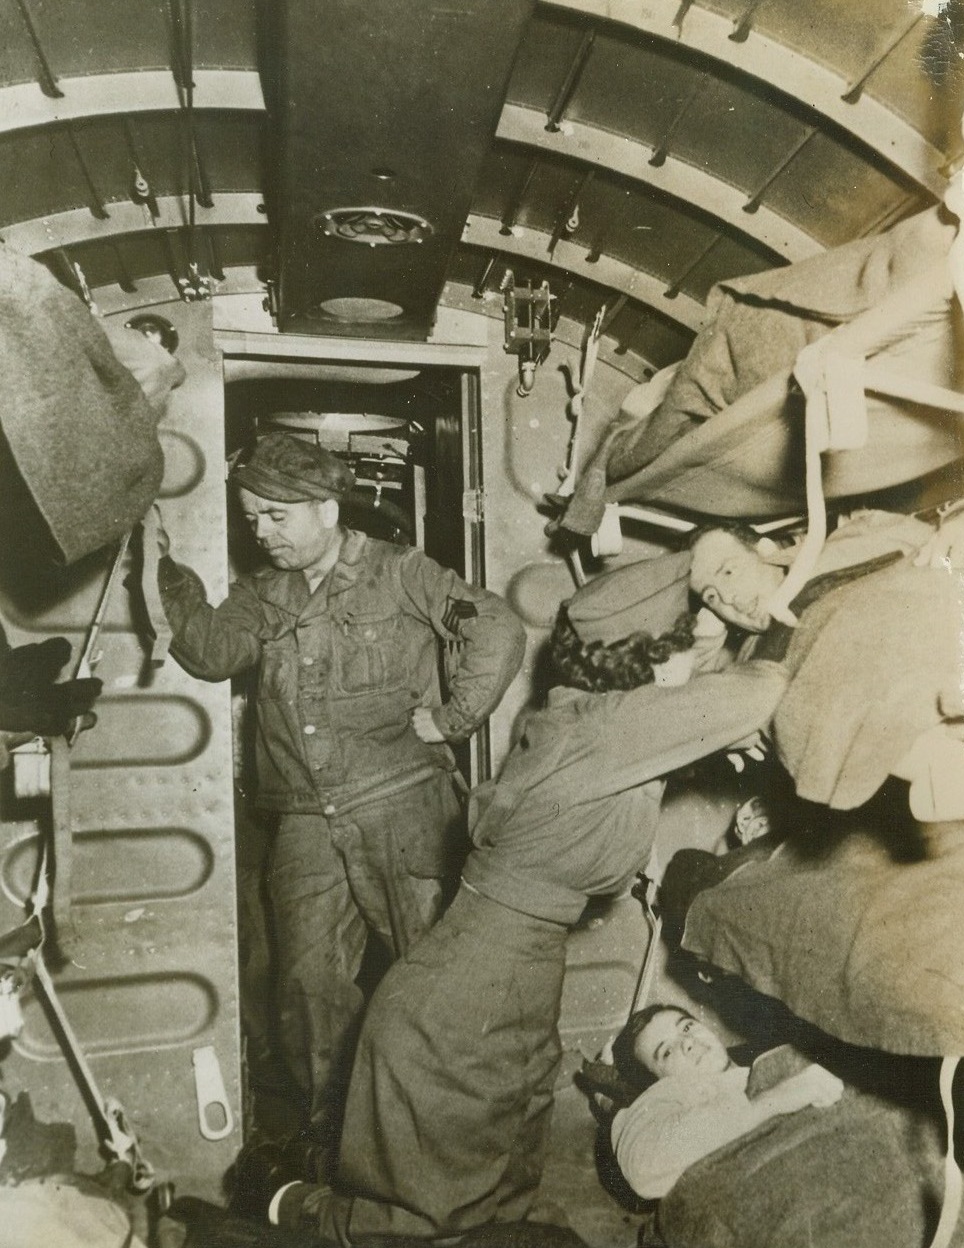 Wounded Flown to U.S. Hospitals, 1/19/1944. Flight Nurse Second Lieut. Kathleen Davis, First Troop Carrier Command, School of Air Evacuation, sees that patients are comfortable in plane during the first mass air evacuation of wounded in the U.S. Flight was from an Eastern port to inland Army general hospitals. The sergeant (standing) is a surgical technician. Credit: Army photo from ACME.;